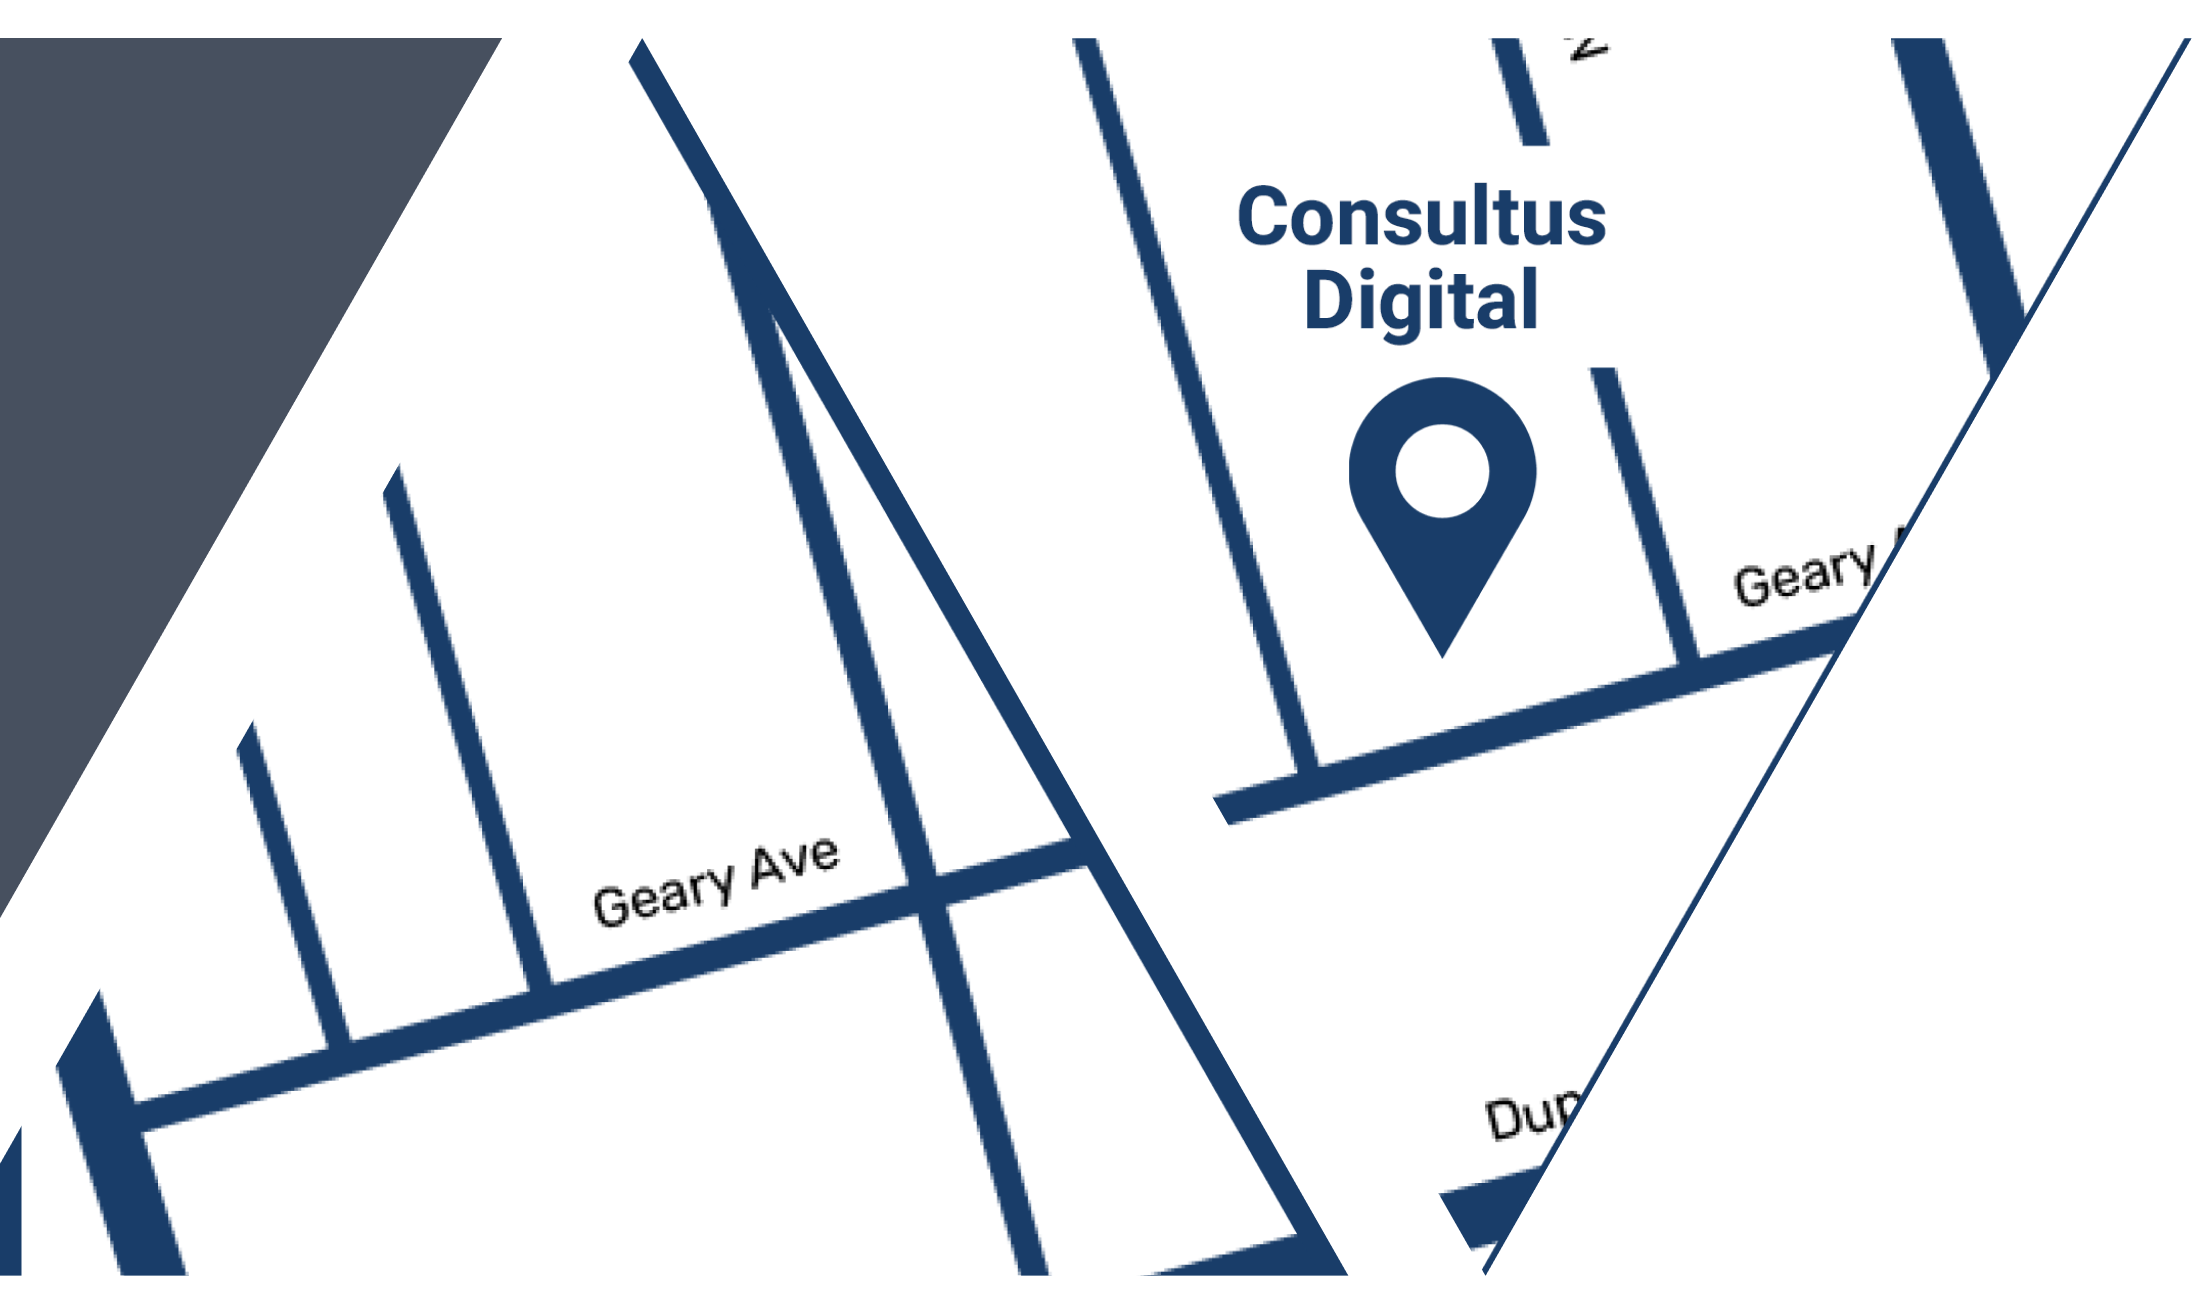 Simply zoomed in map of Geary Ave. in Toronto showing where Consultus Digital social media marketing office is located 